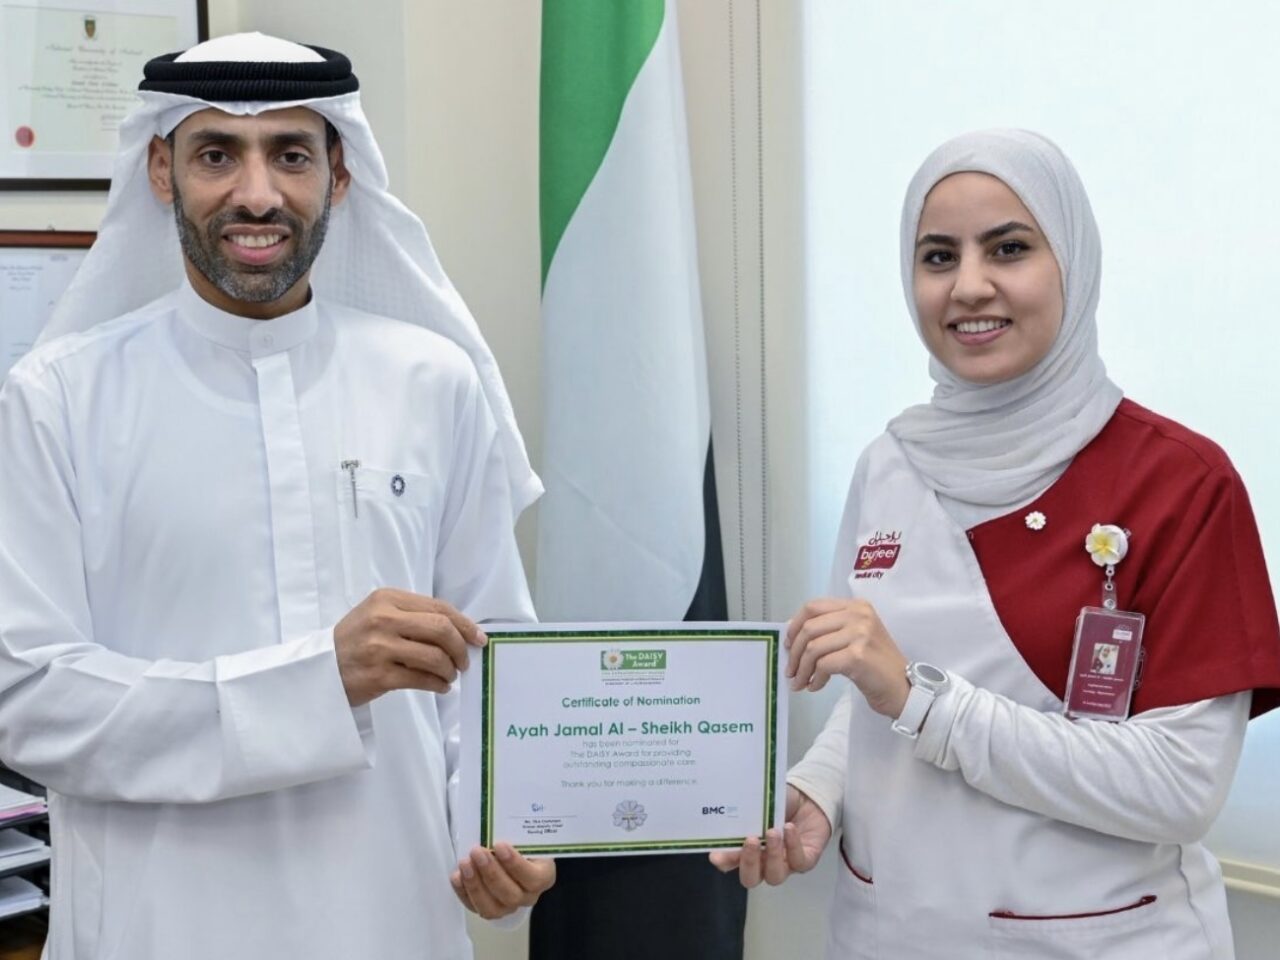 Ayah Qasem: I have received a certificate of nomination for the DAISY Award